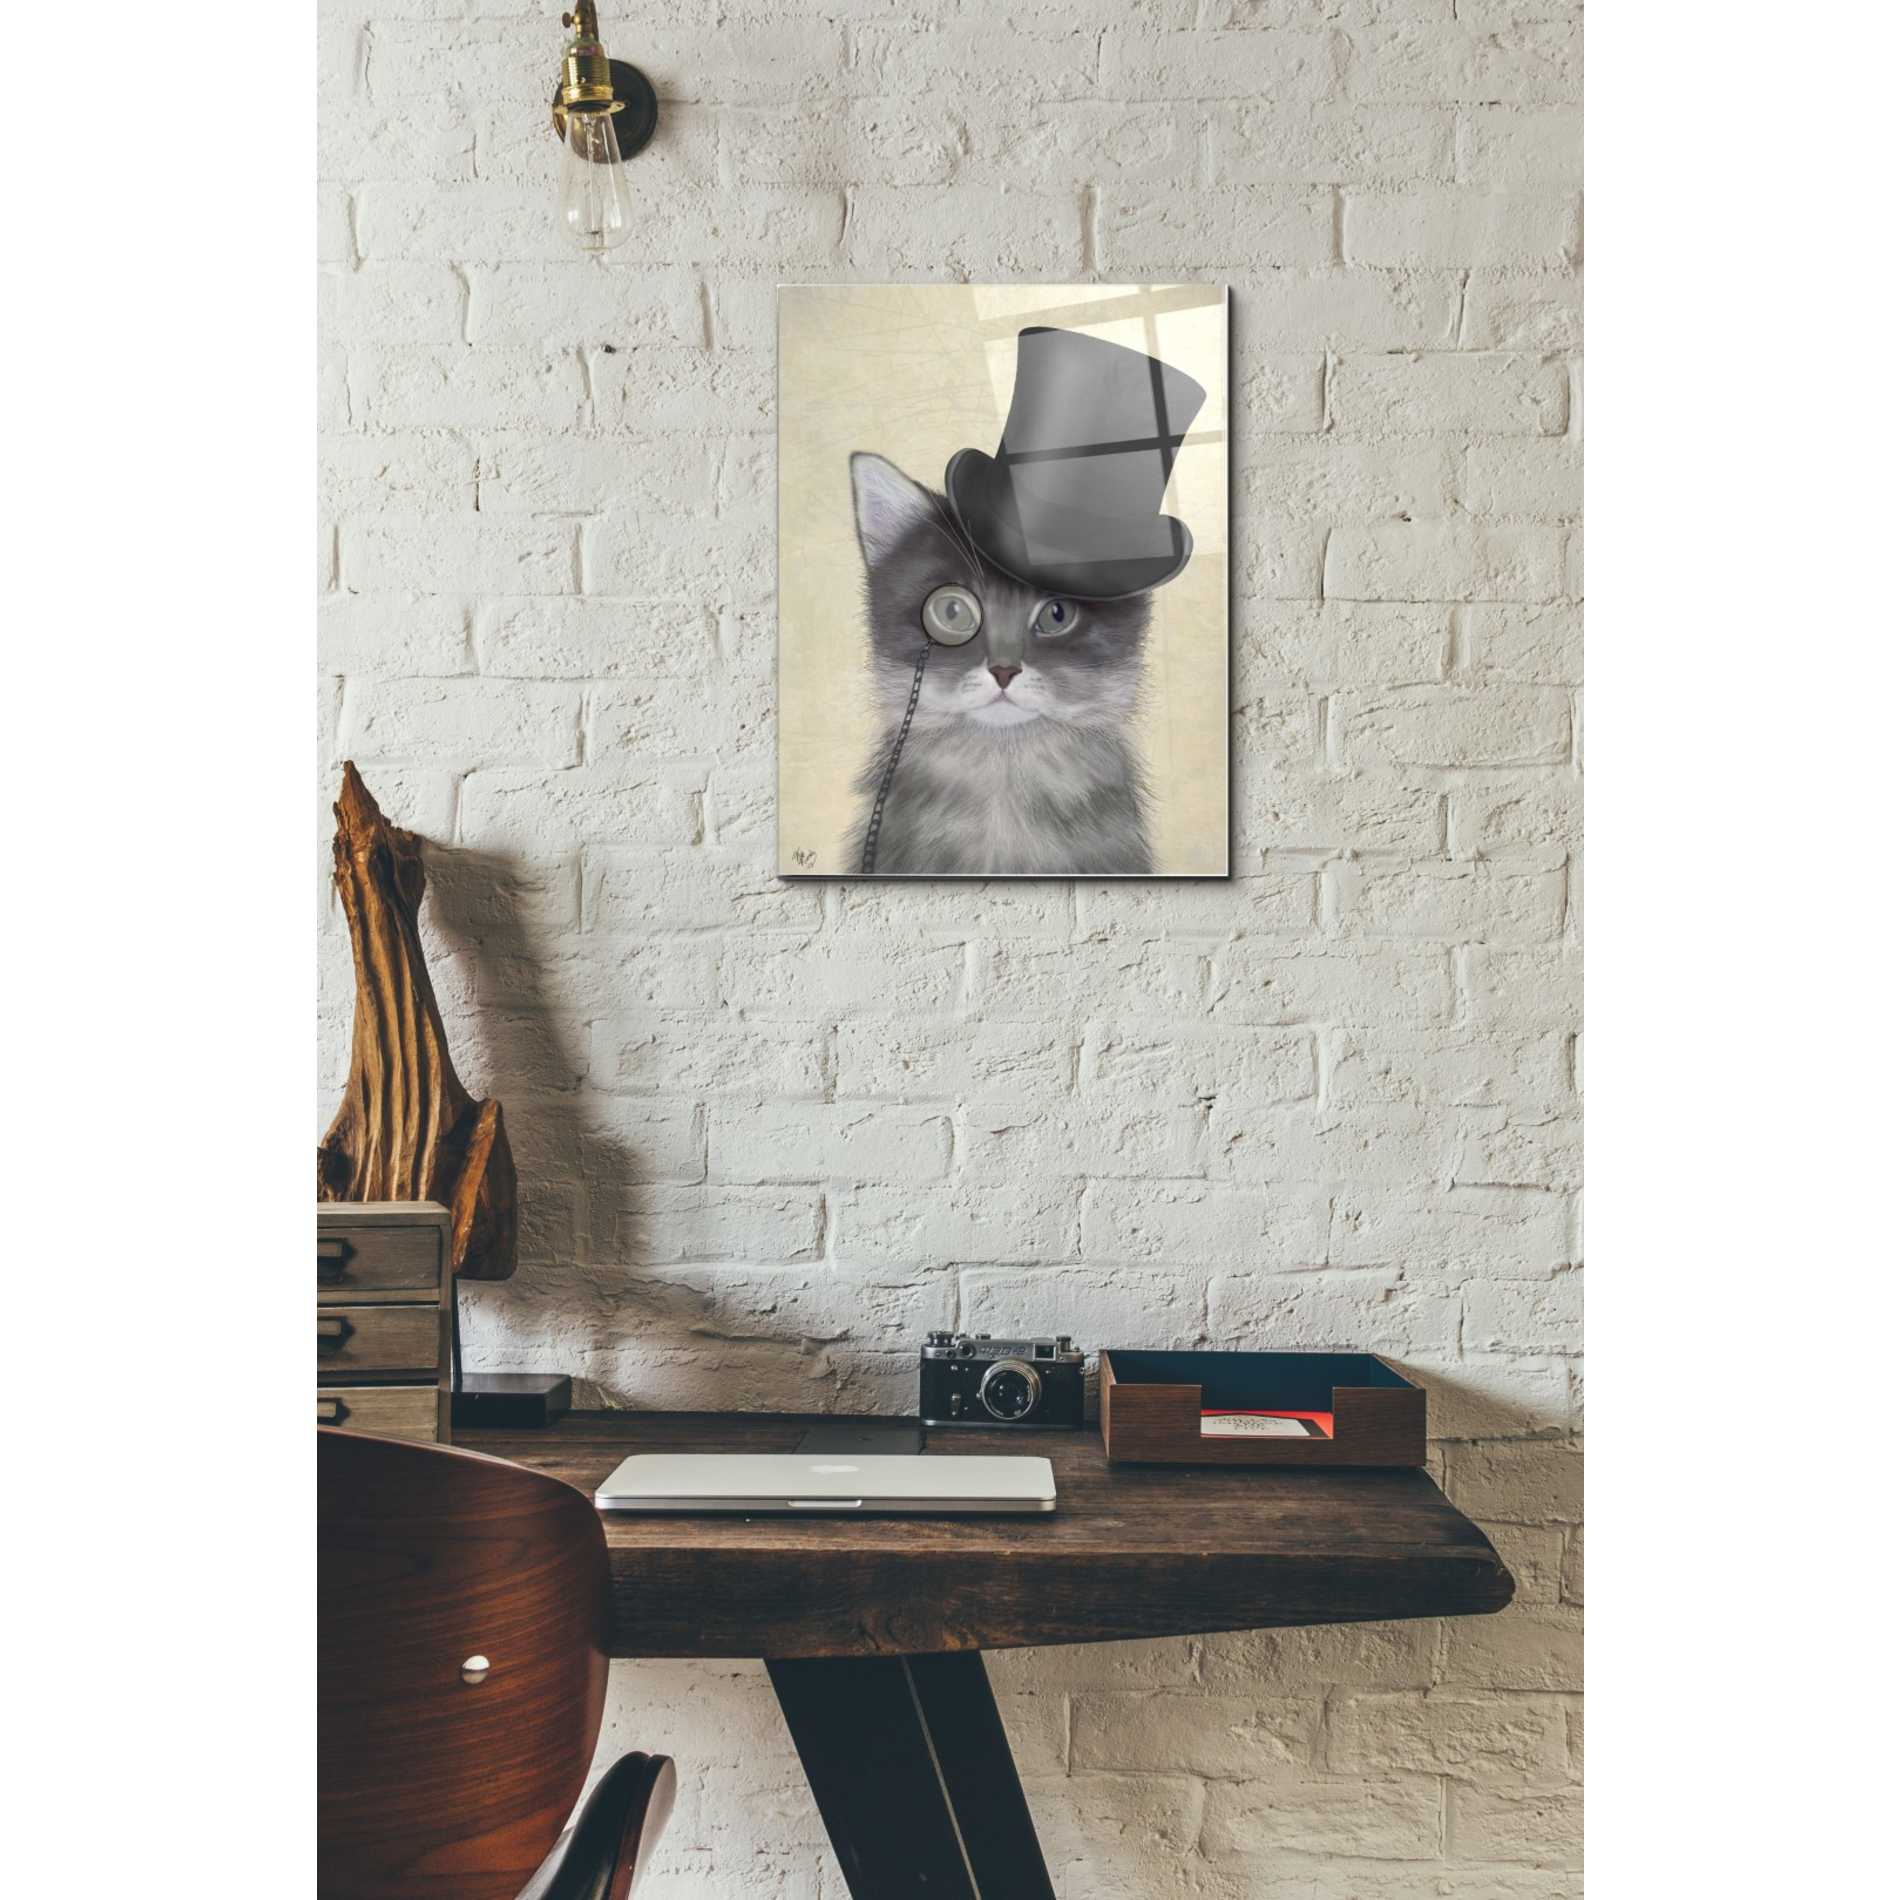 Epic Art 'Cat, Grey with Top Hat' by Fab Funky Acrylic Glass Wall Art,12x16